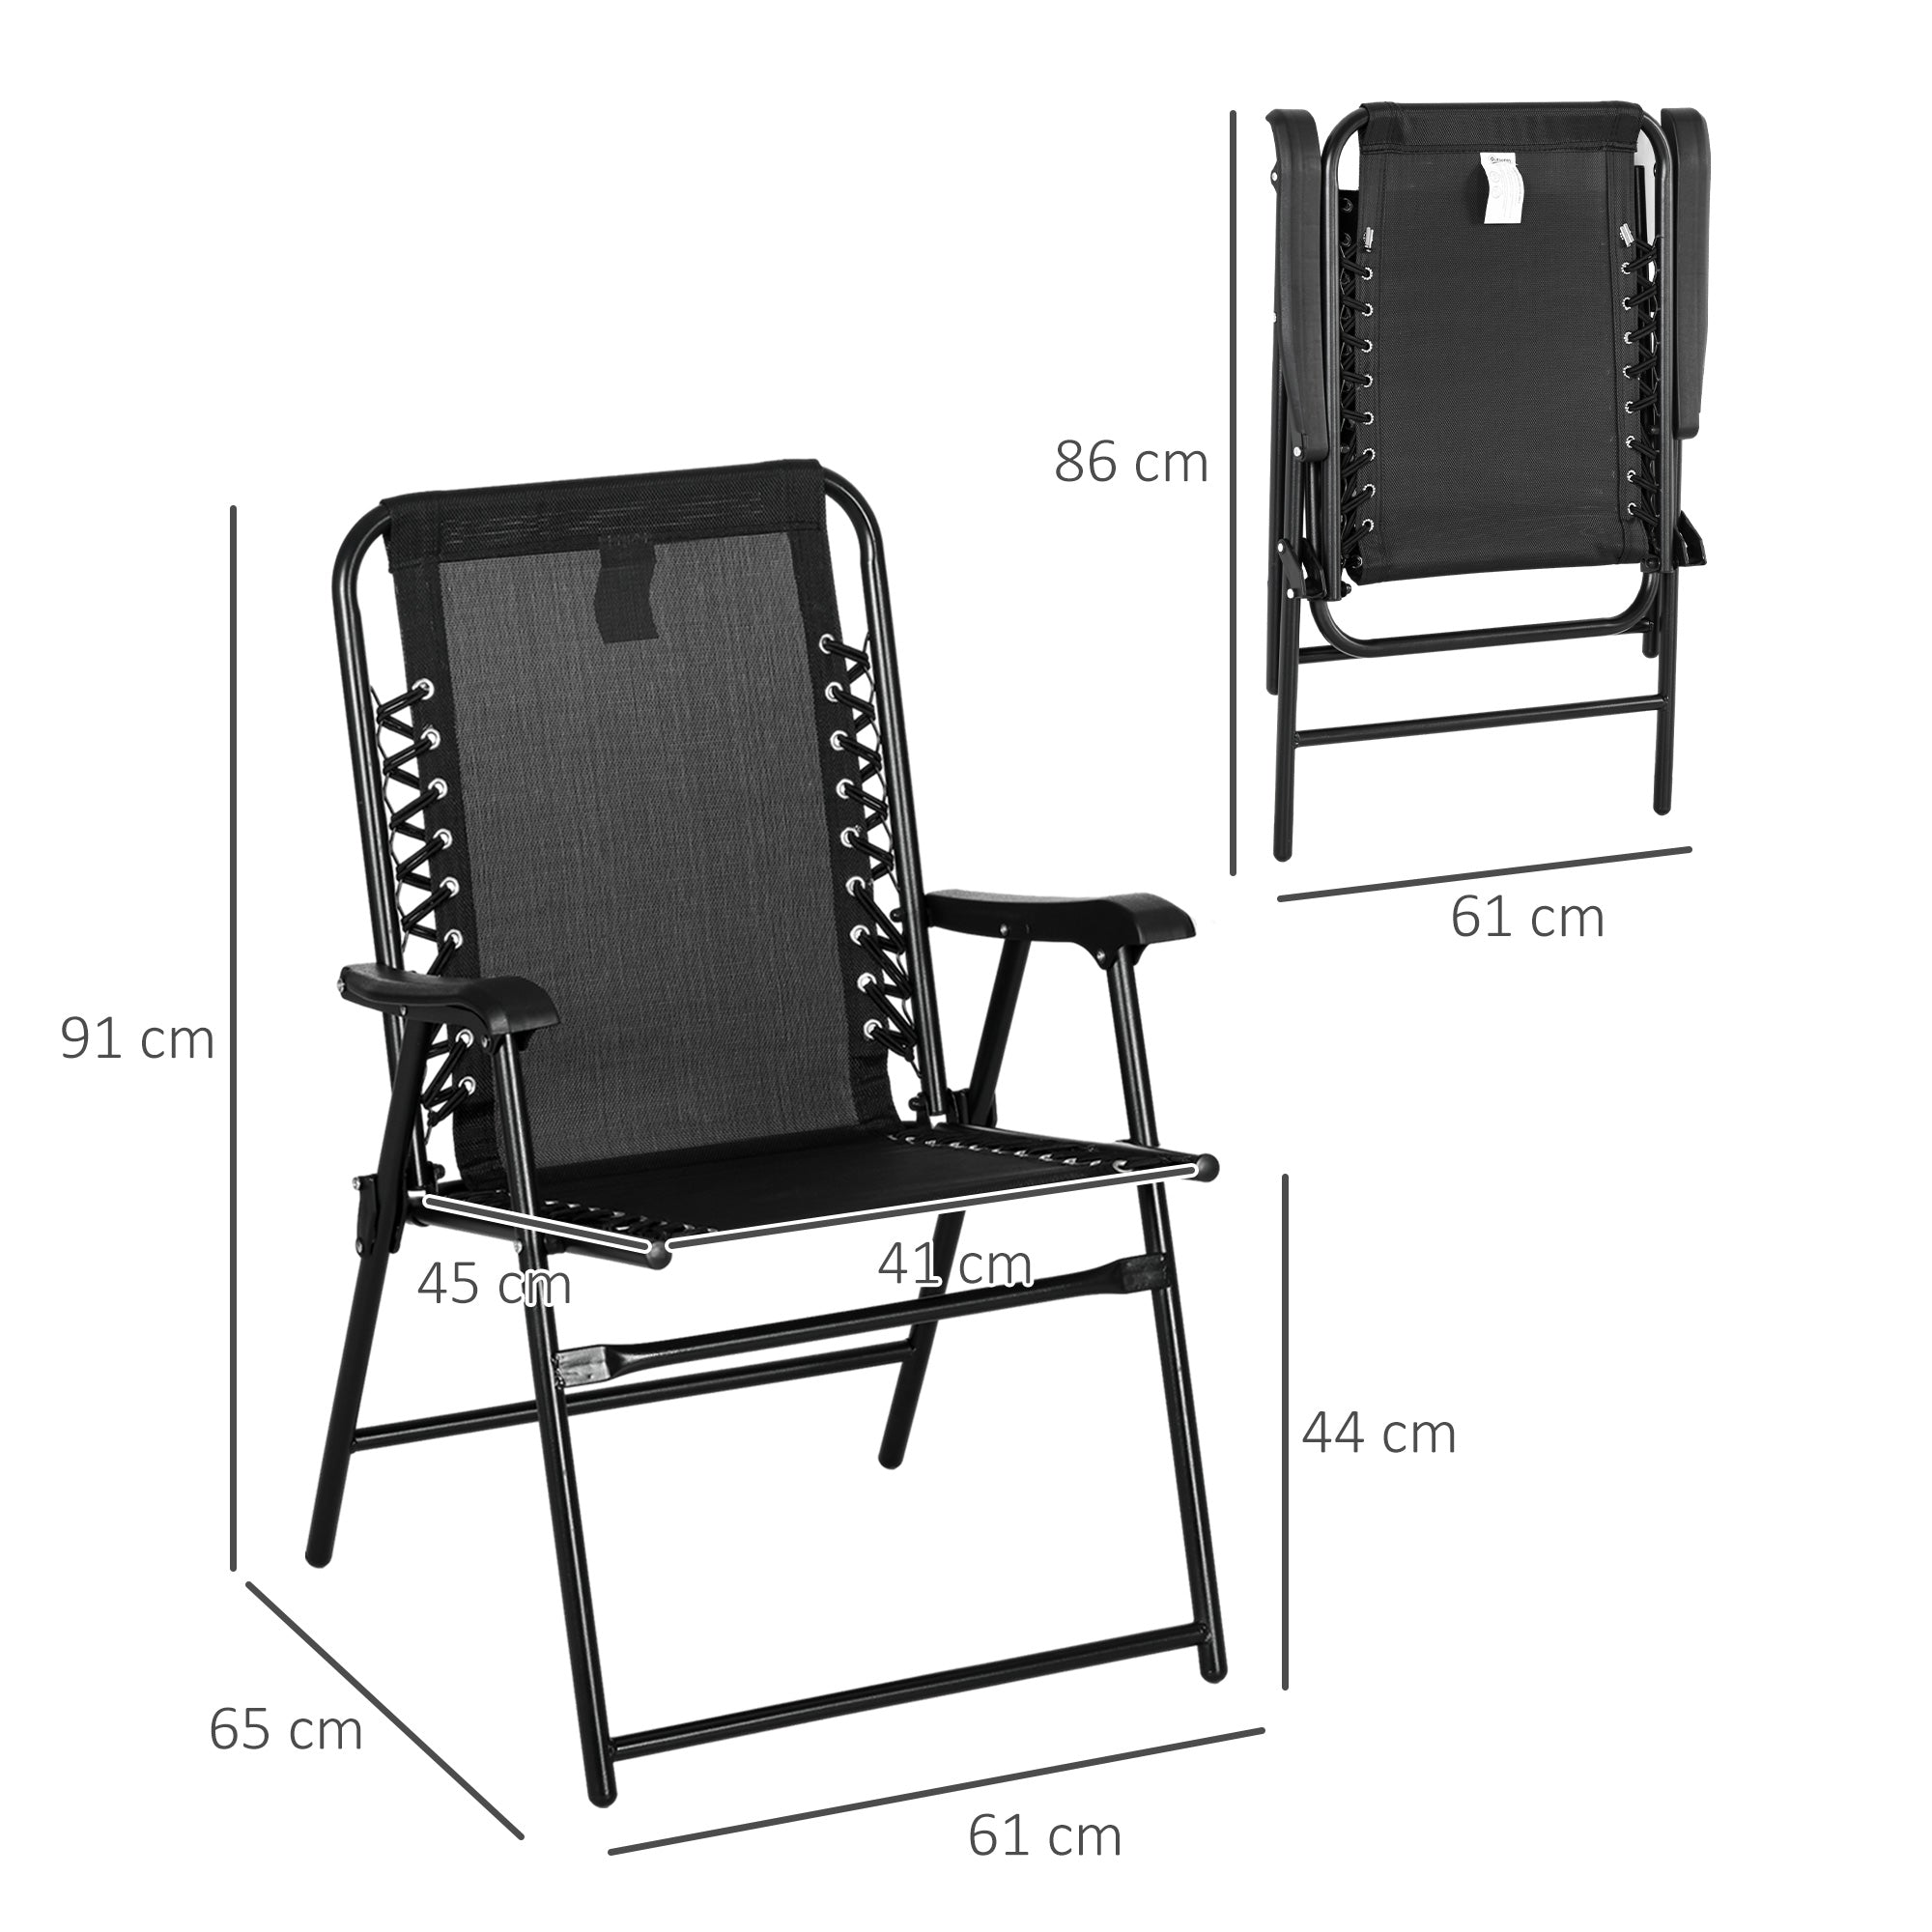 2 Pcs Patio Folding Chair Set, Outdoor Portable Loungers for Camping Pool Beach Deck, Lawn w/ Armrest Steel Frame Black-2